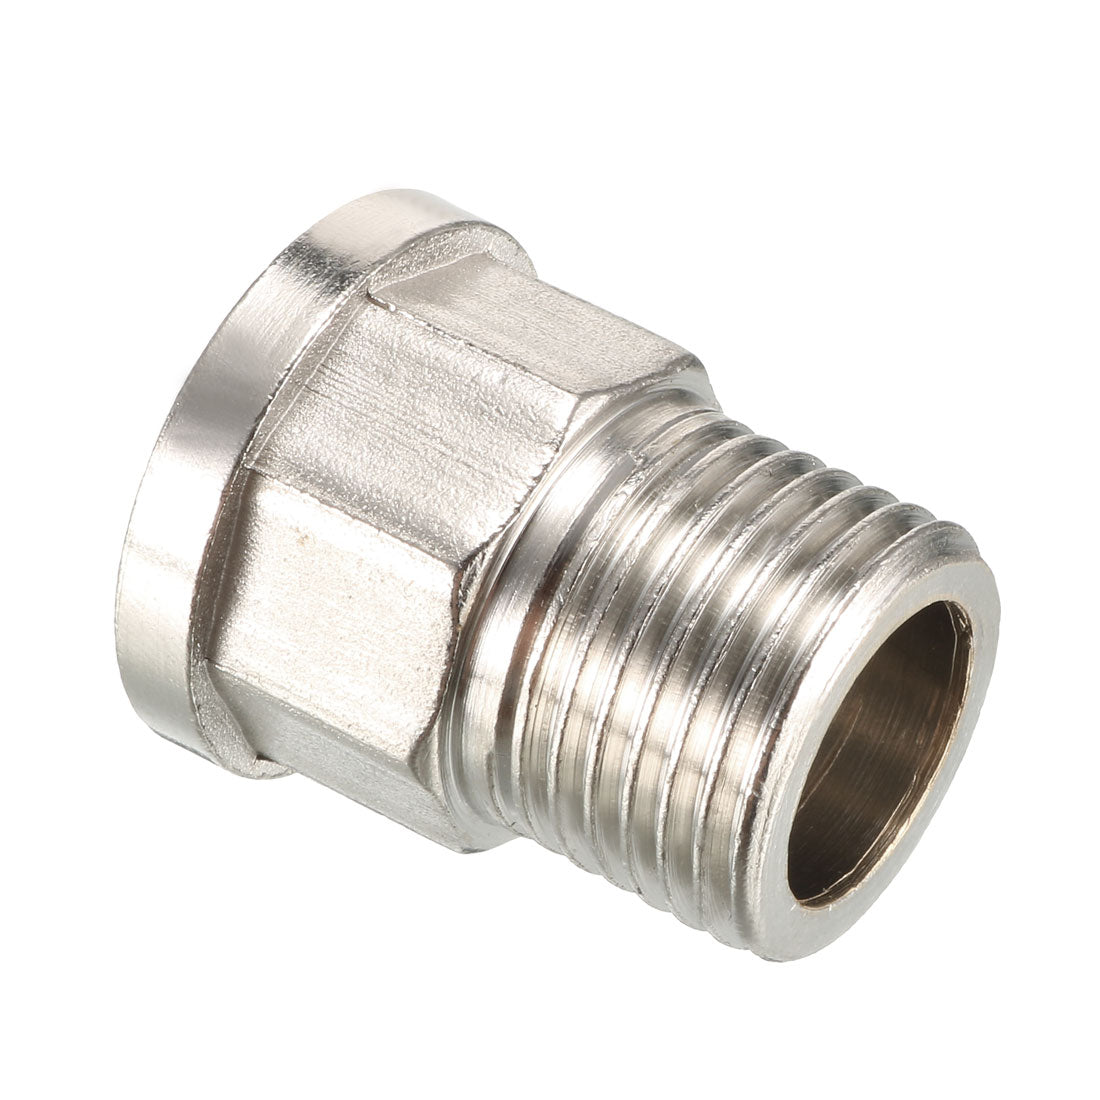 uxcell Uxcell Brass Garden Pipe Fitting Adapter 1/2 PT Male x 1/2 PT Female Coupling